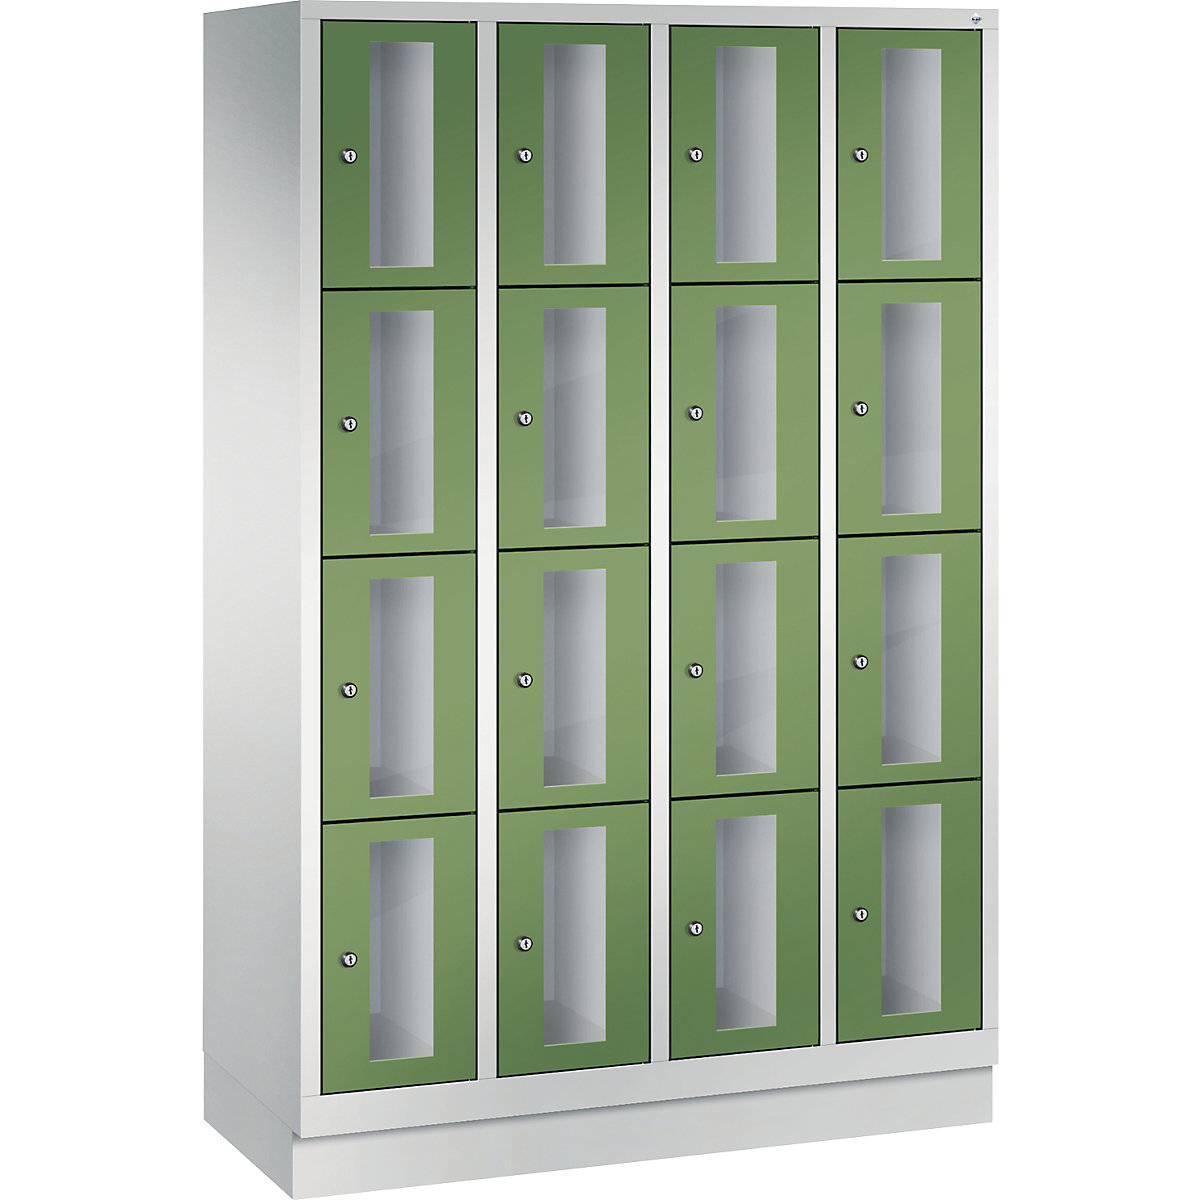 C+P – CLASSIC locker unit, compartment height 375 mm, with plinth, 16 compartments, width 1190 mm, reseda green door